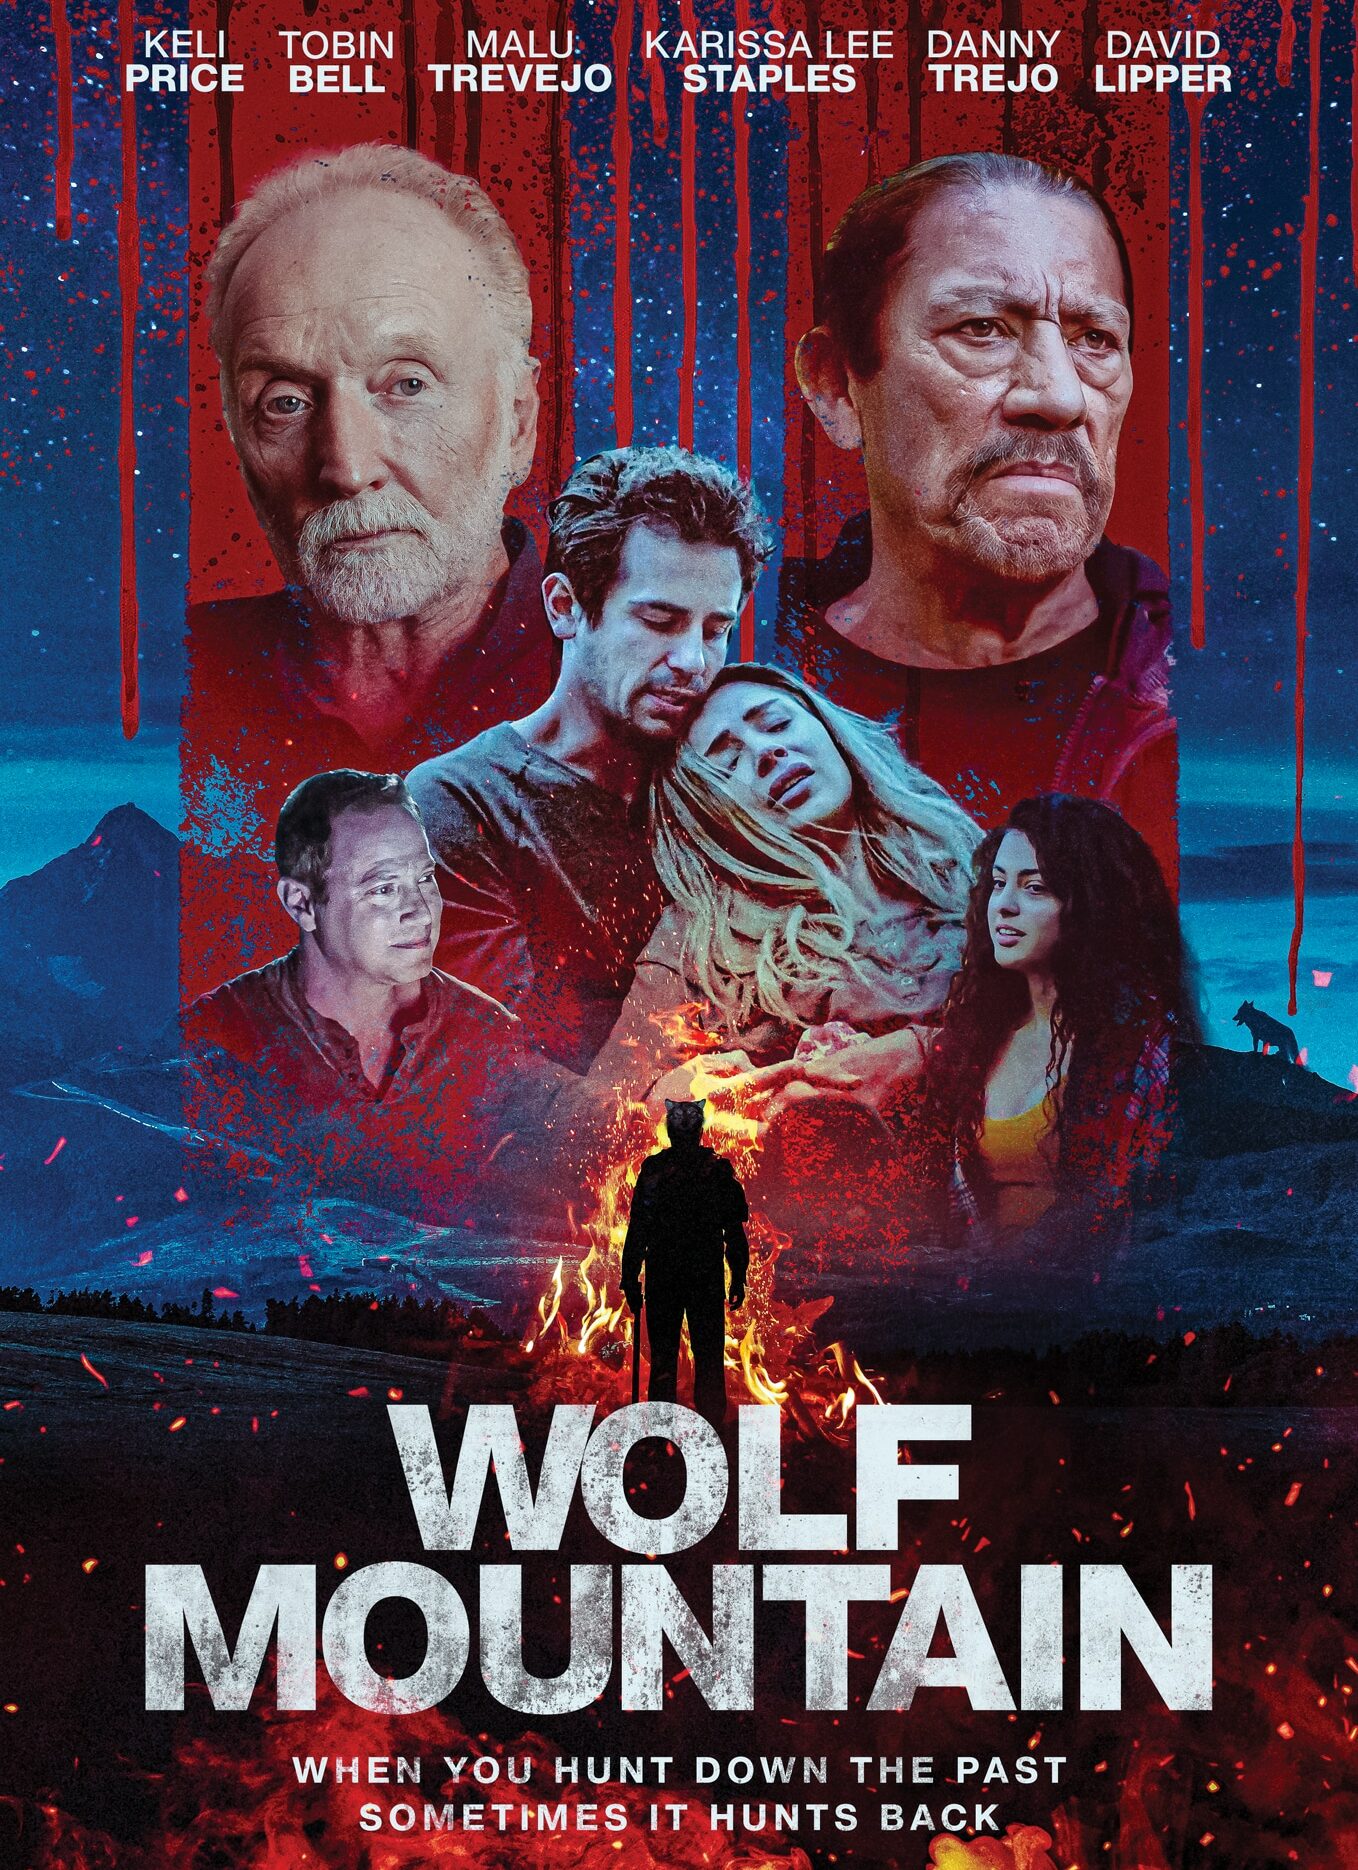 The Curse of Wolf Mountain - Teaser Poster